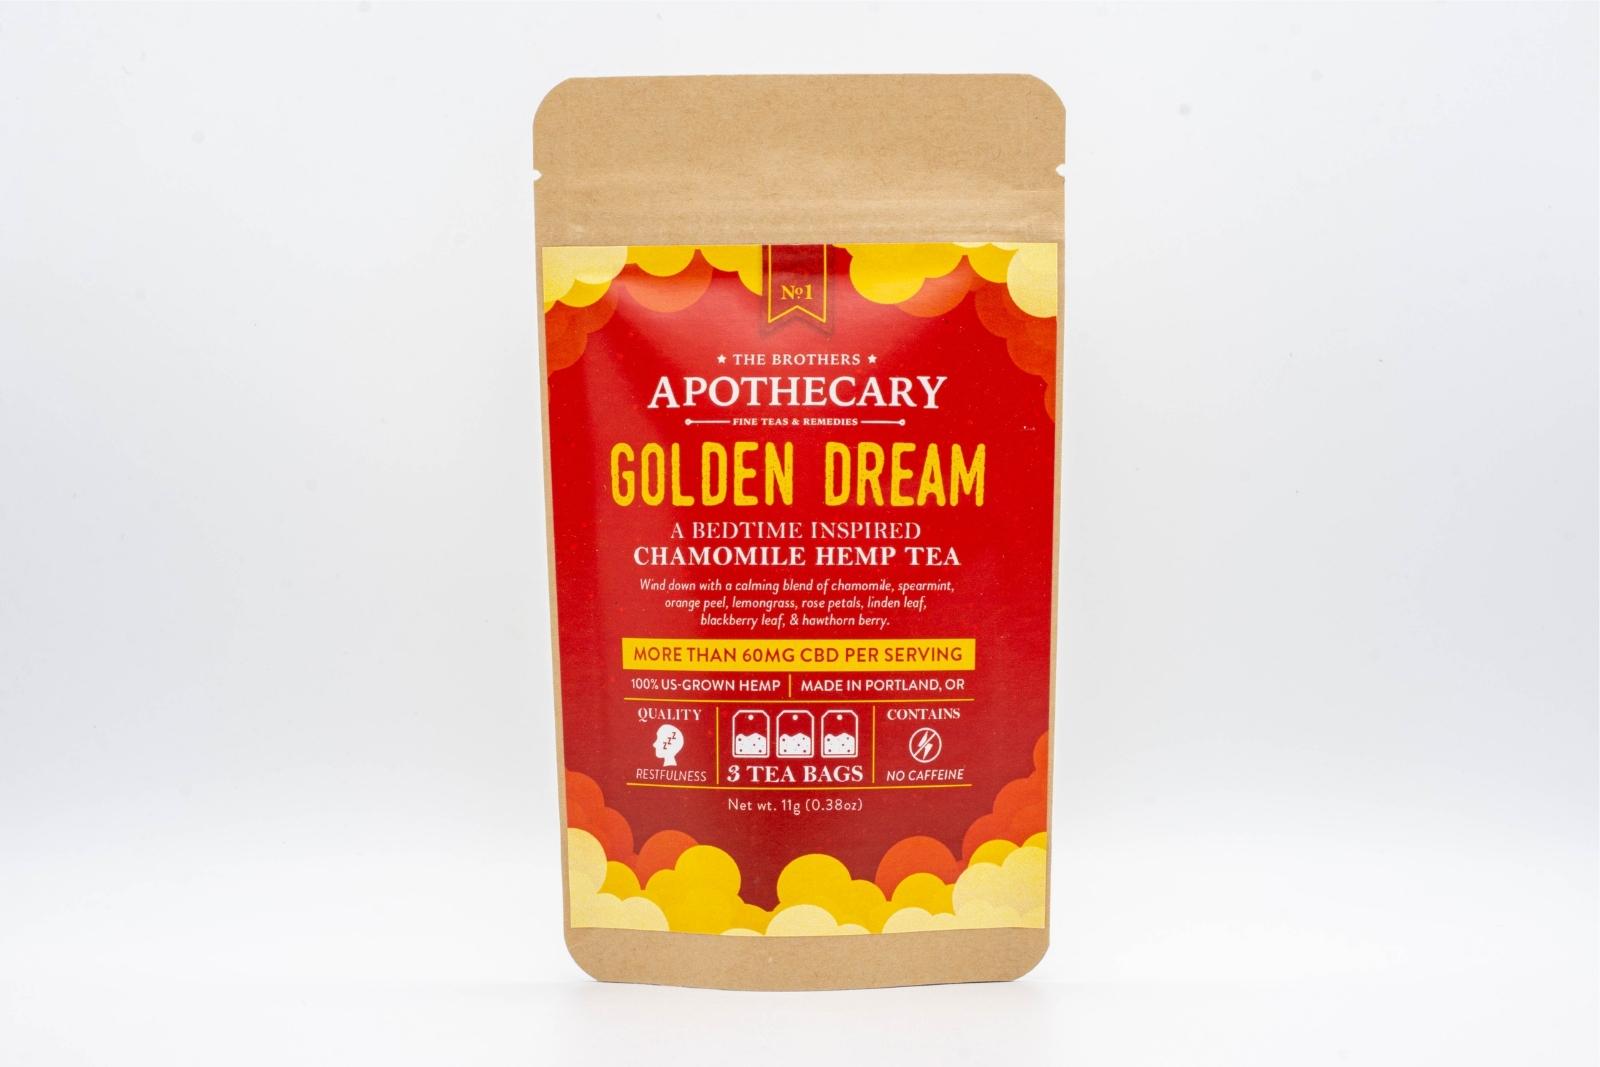 A large packet of The Brothers Apothecary's Golden Dream Tea on a white background